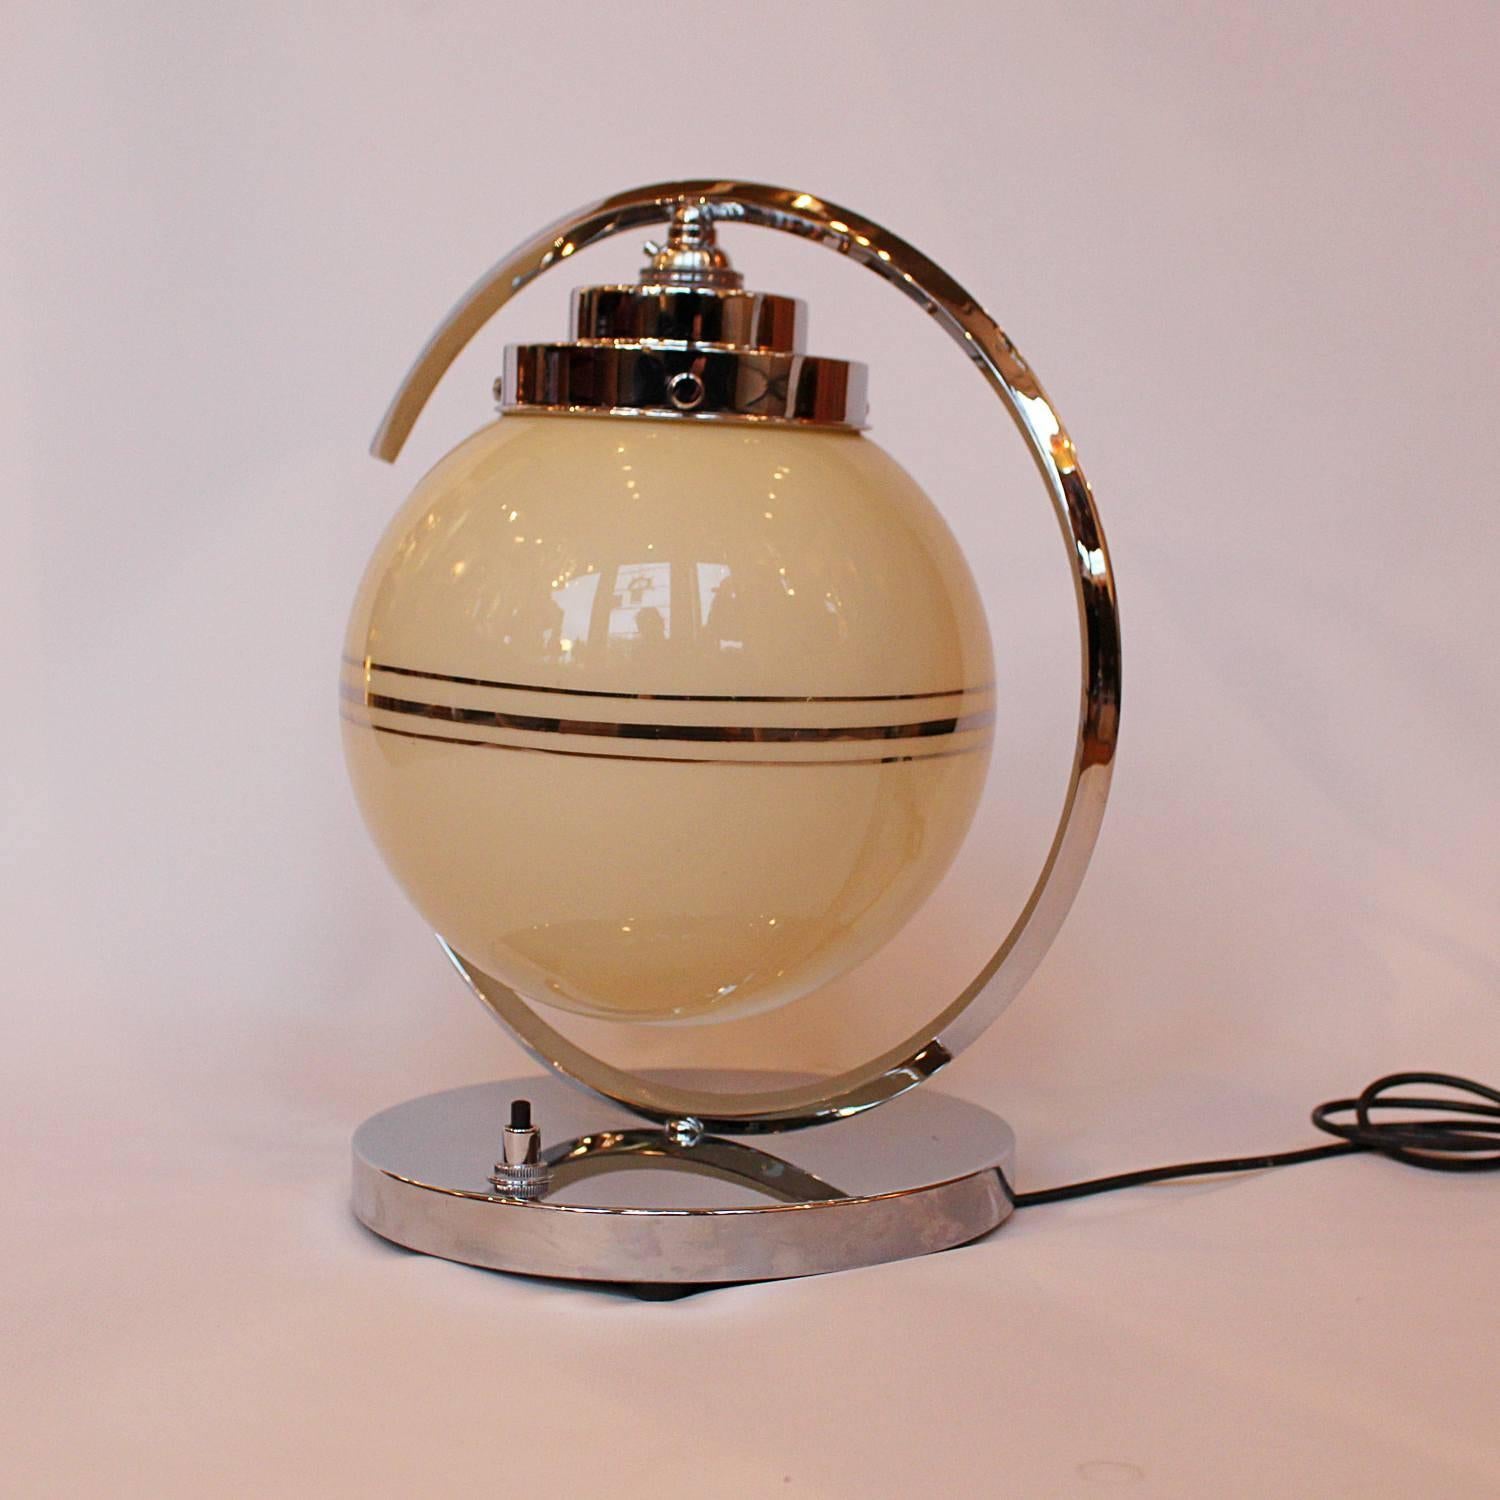 An Art Deco table lamp. Original glass shade with silvered banding, set in a c-shaped, chromed metal frame with stepped top.

Fully refurbished, re-wired and re-chromed, with some replacement parts.

Dimensions: H 34cm, W of shade 20cm, W of base